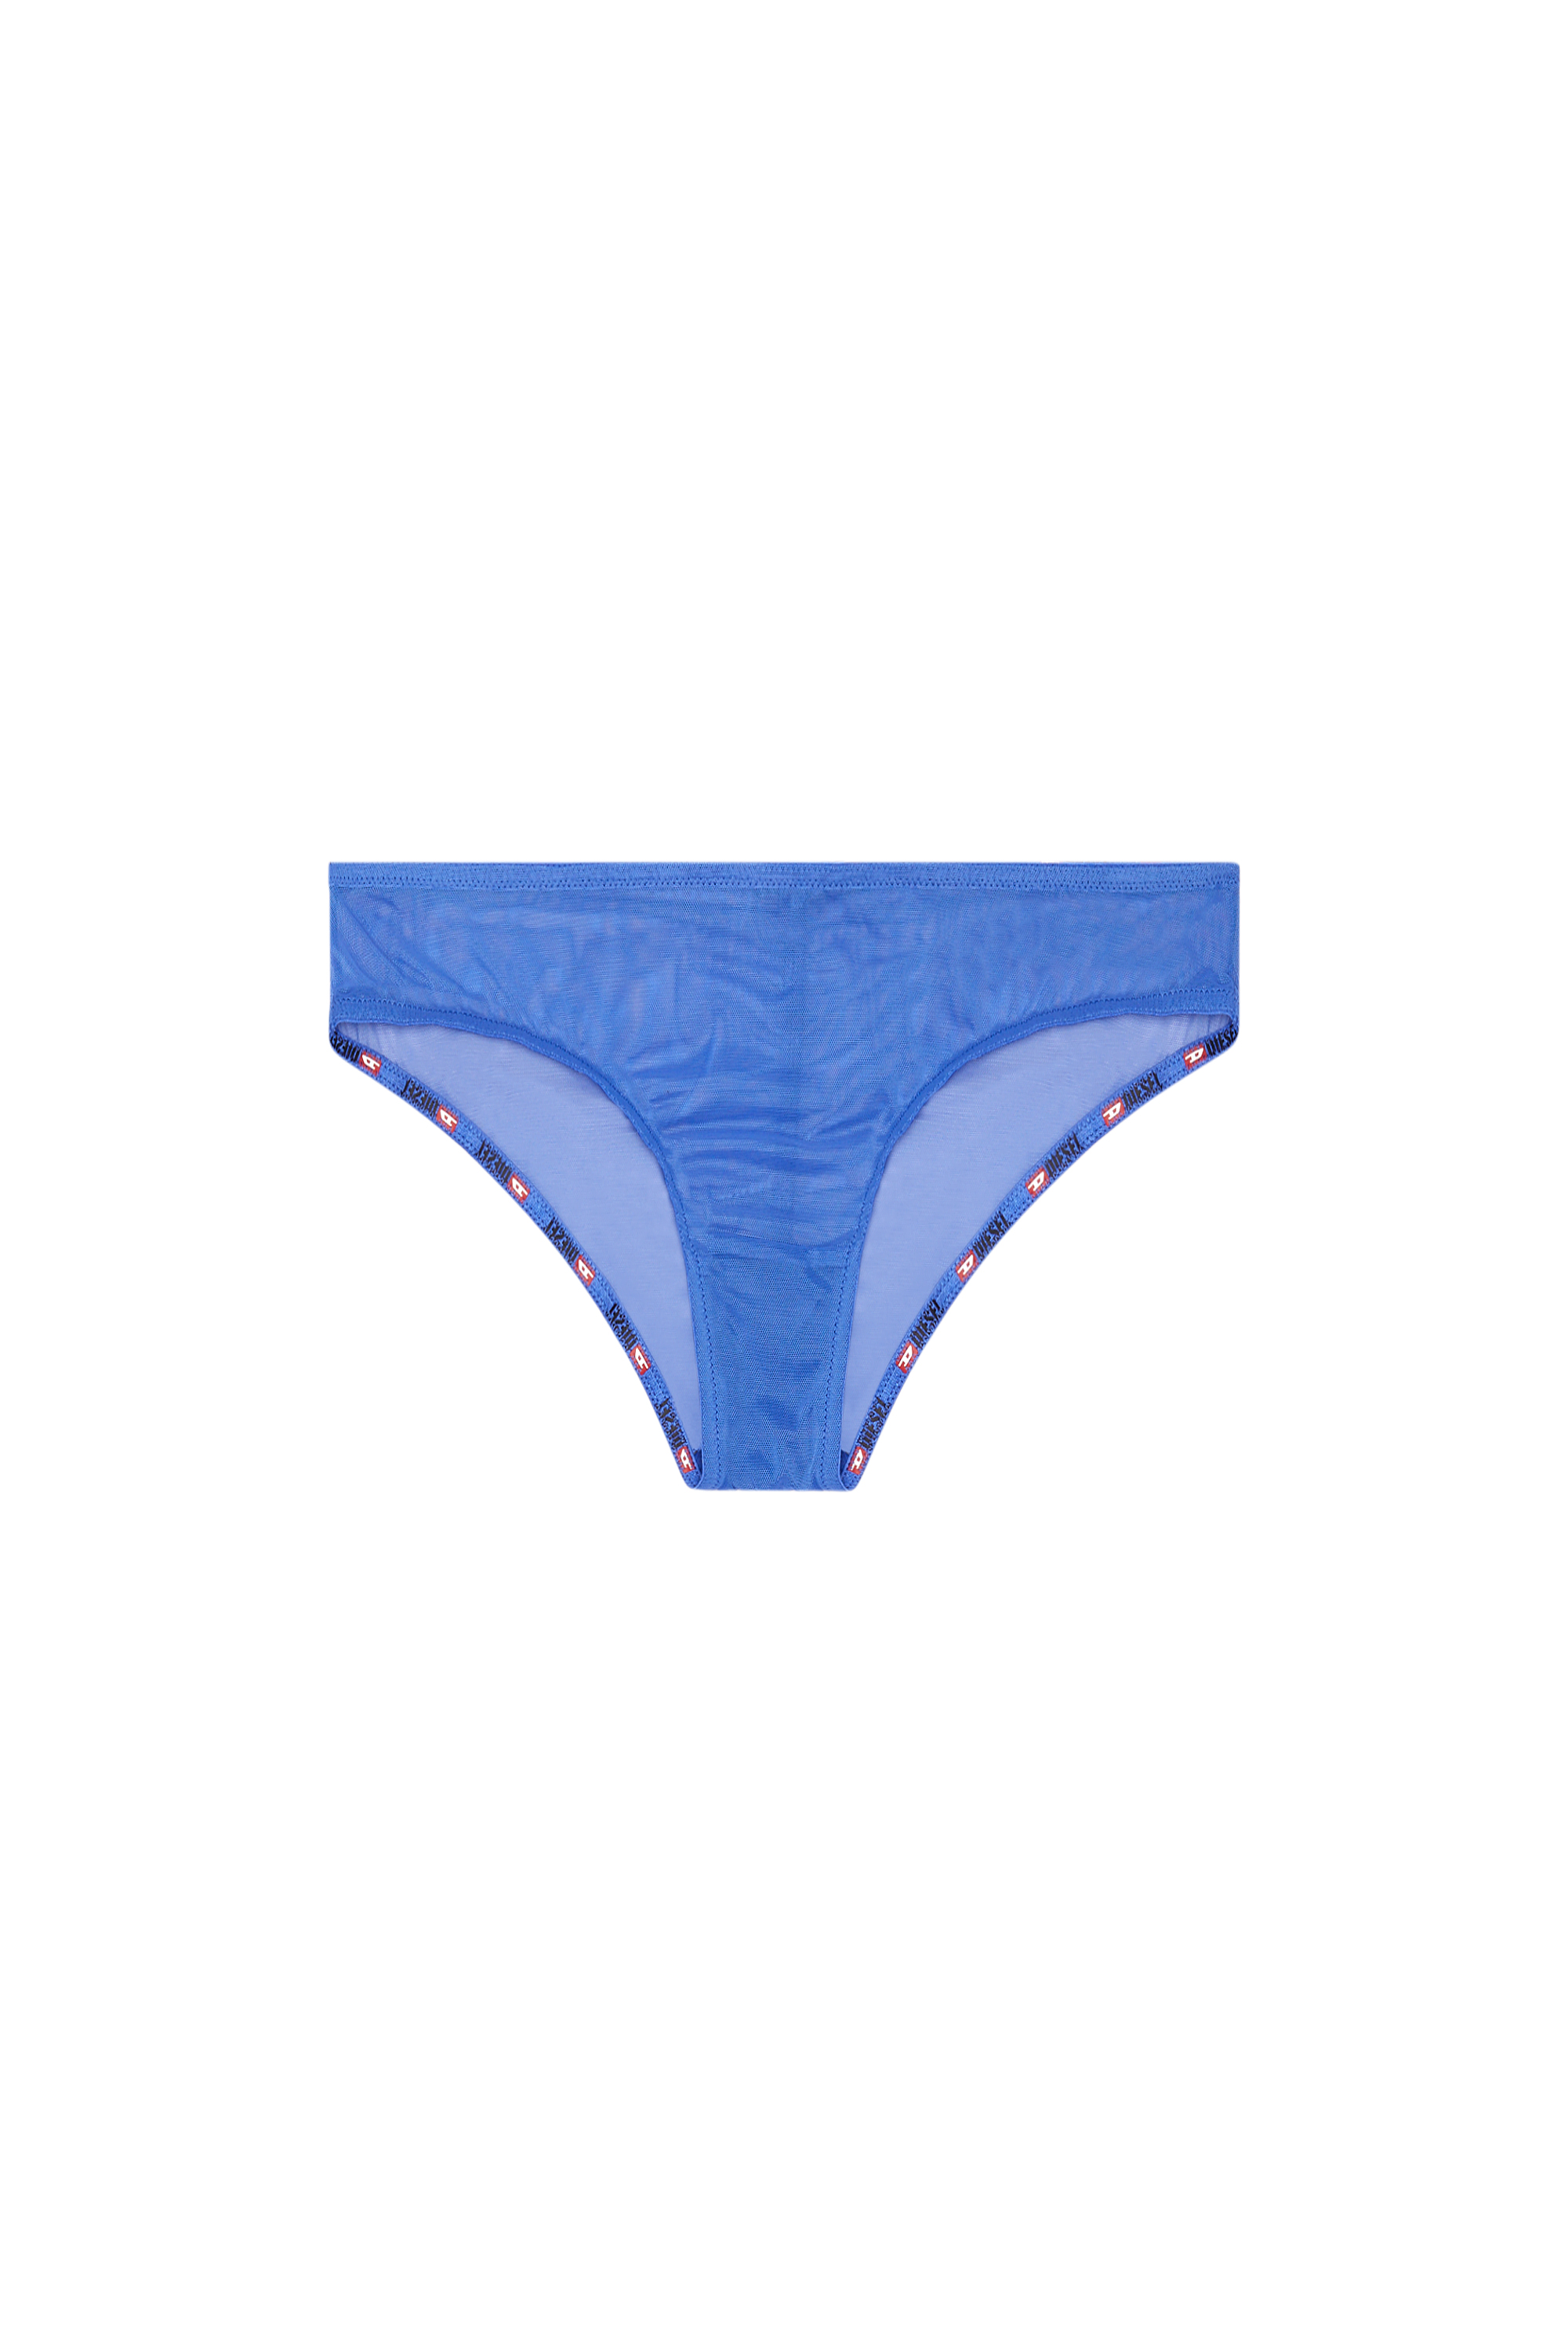 Diesel - Perk up. D-Pop underwear, done in fluorescent Pop colors branded  with the Diesel logo, cover your assets with high energy hues and comfort.  Shop Women's Underwear at  Shop Men's